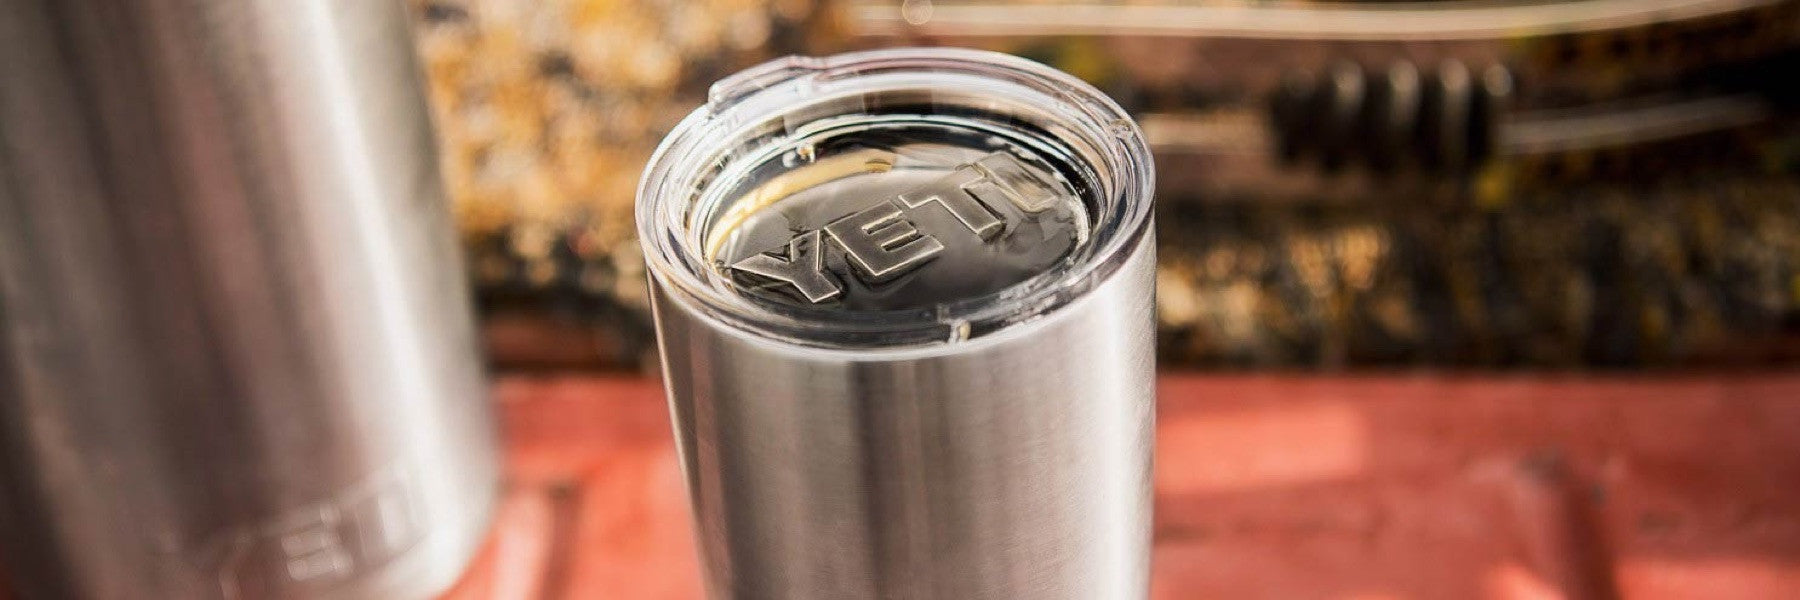 Yeti Rambler 20oz Cocktail Shaker - The Compleat Angler